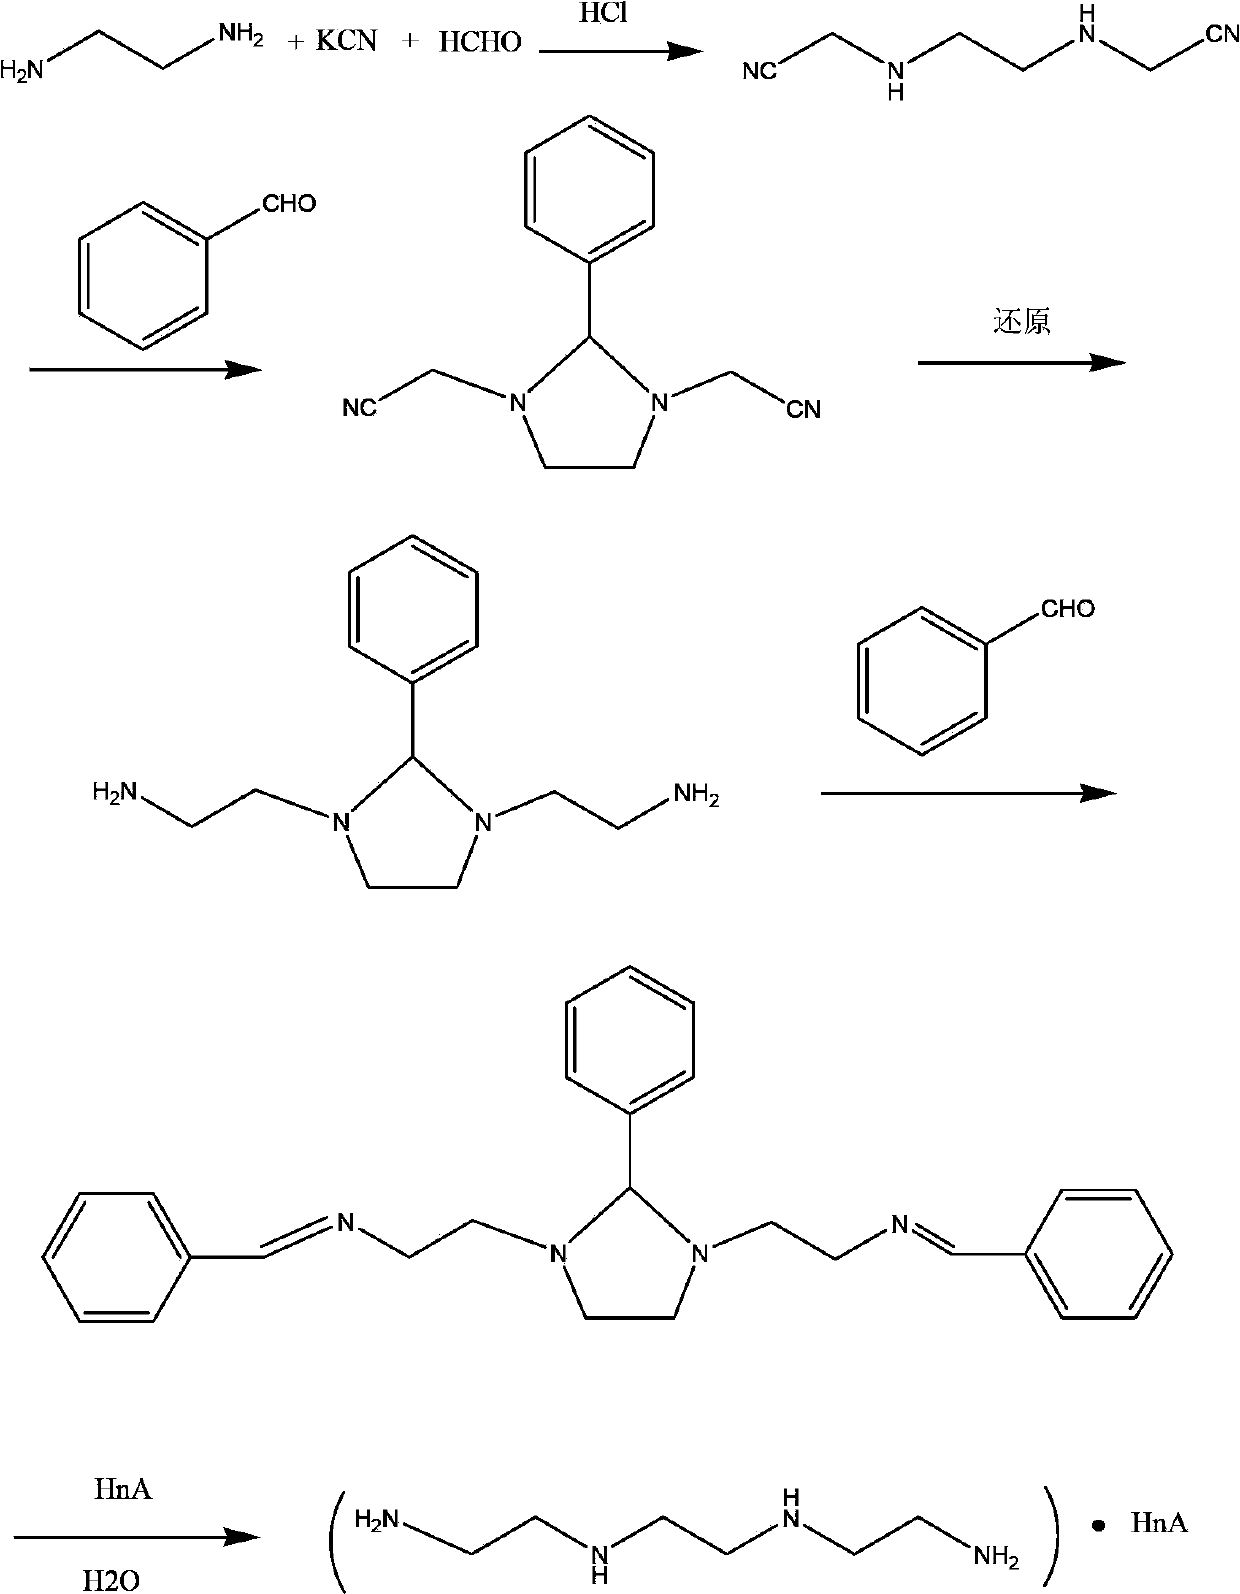 Synthetic process of hydrochloric acid trientine